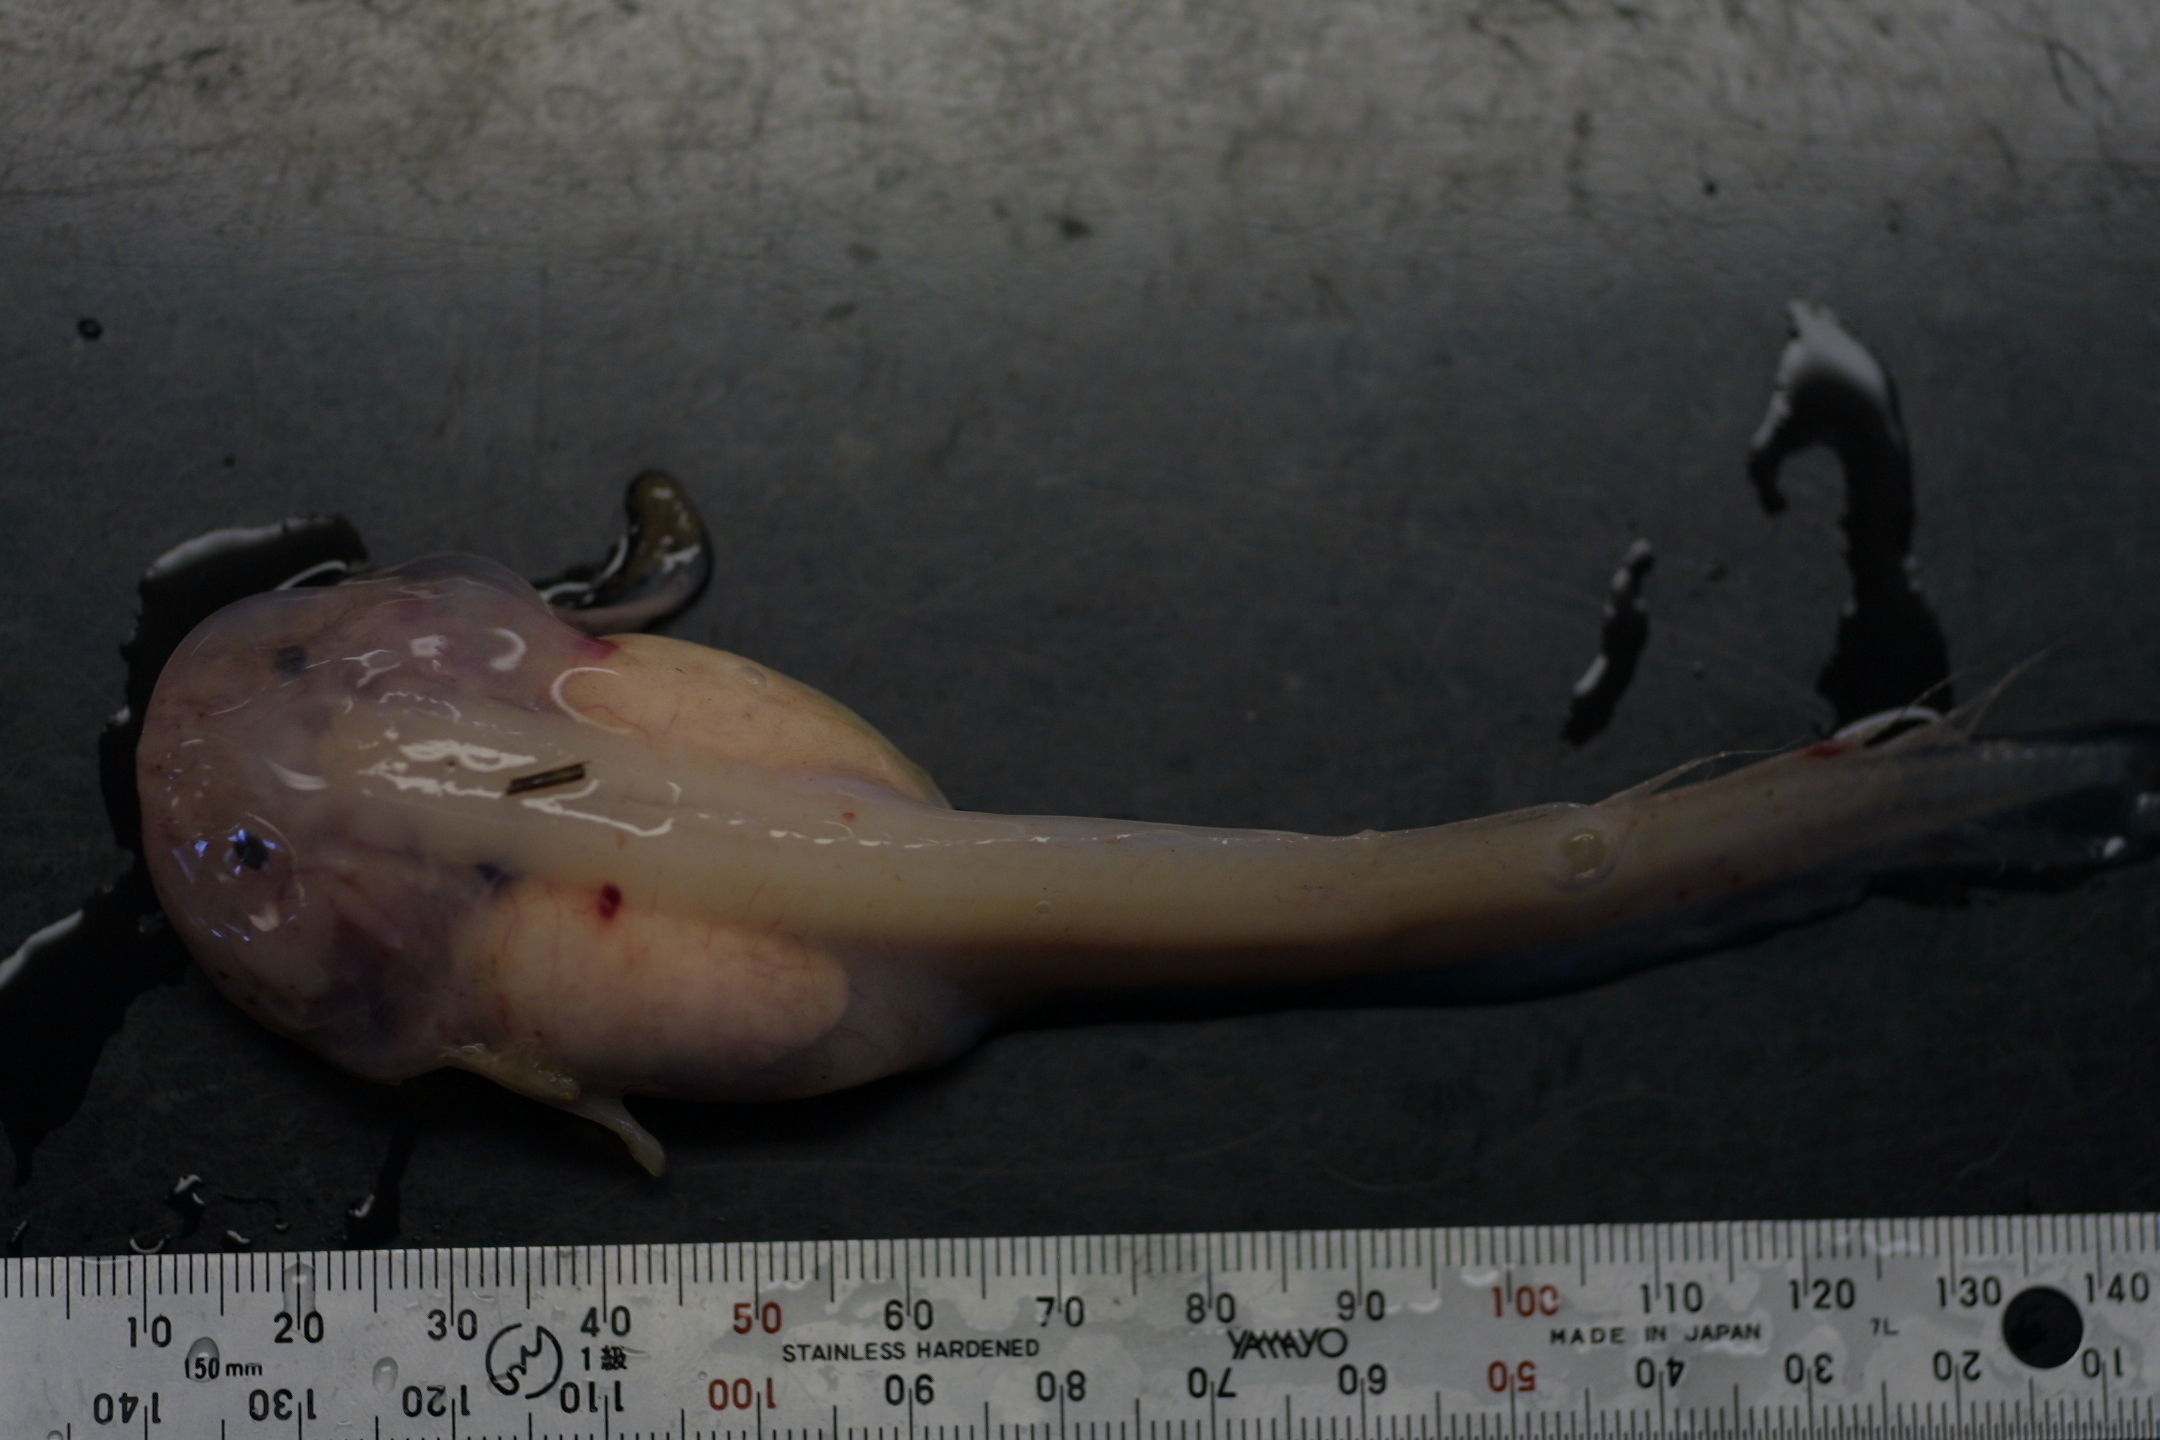 The liparid (Snailfish) Psuedoliparis amblystomopsis recovered from the giant trap at 7,703m deep in the Japan Trench in the Pacific Ocean (Natural Environment Research Council and University of Aberdeen)